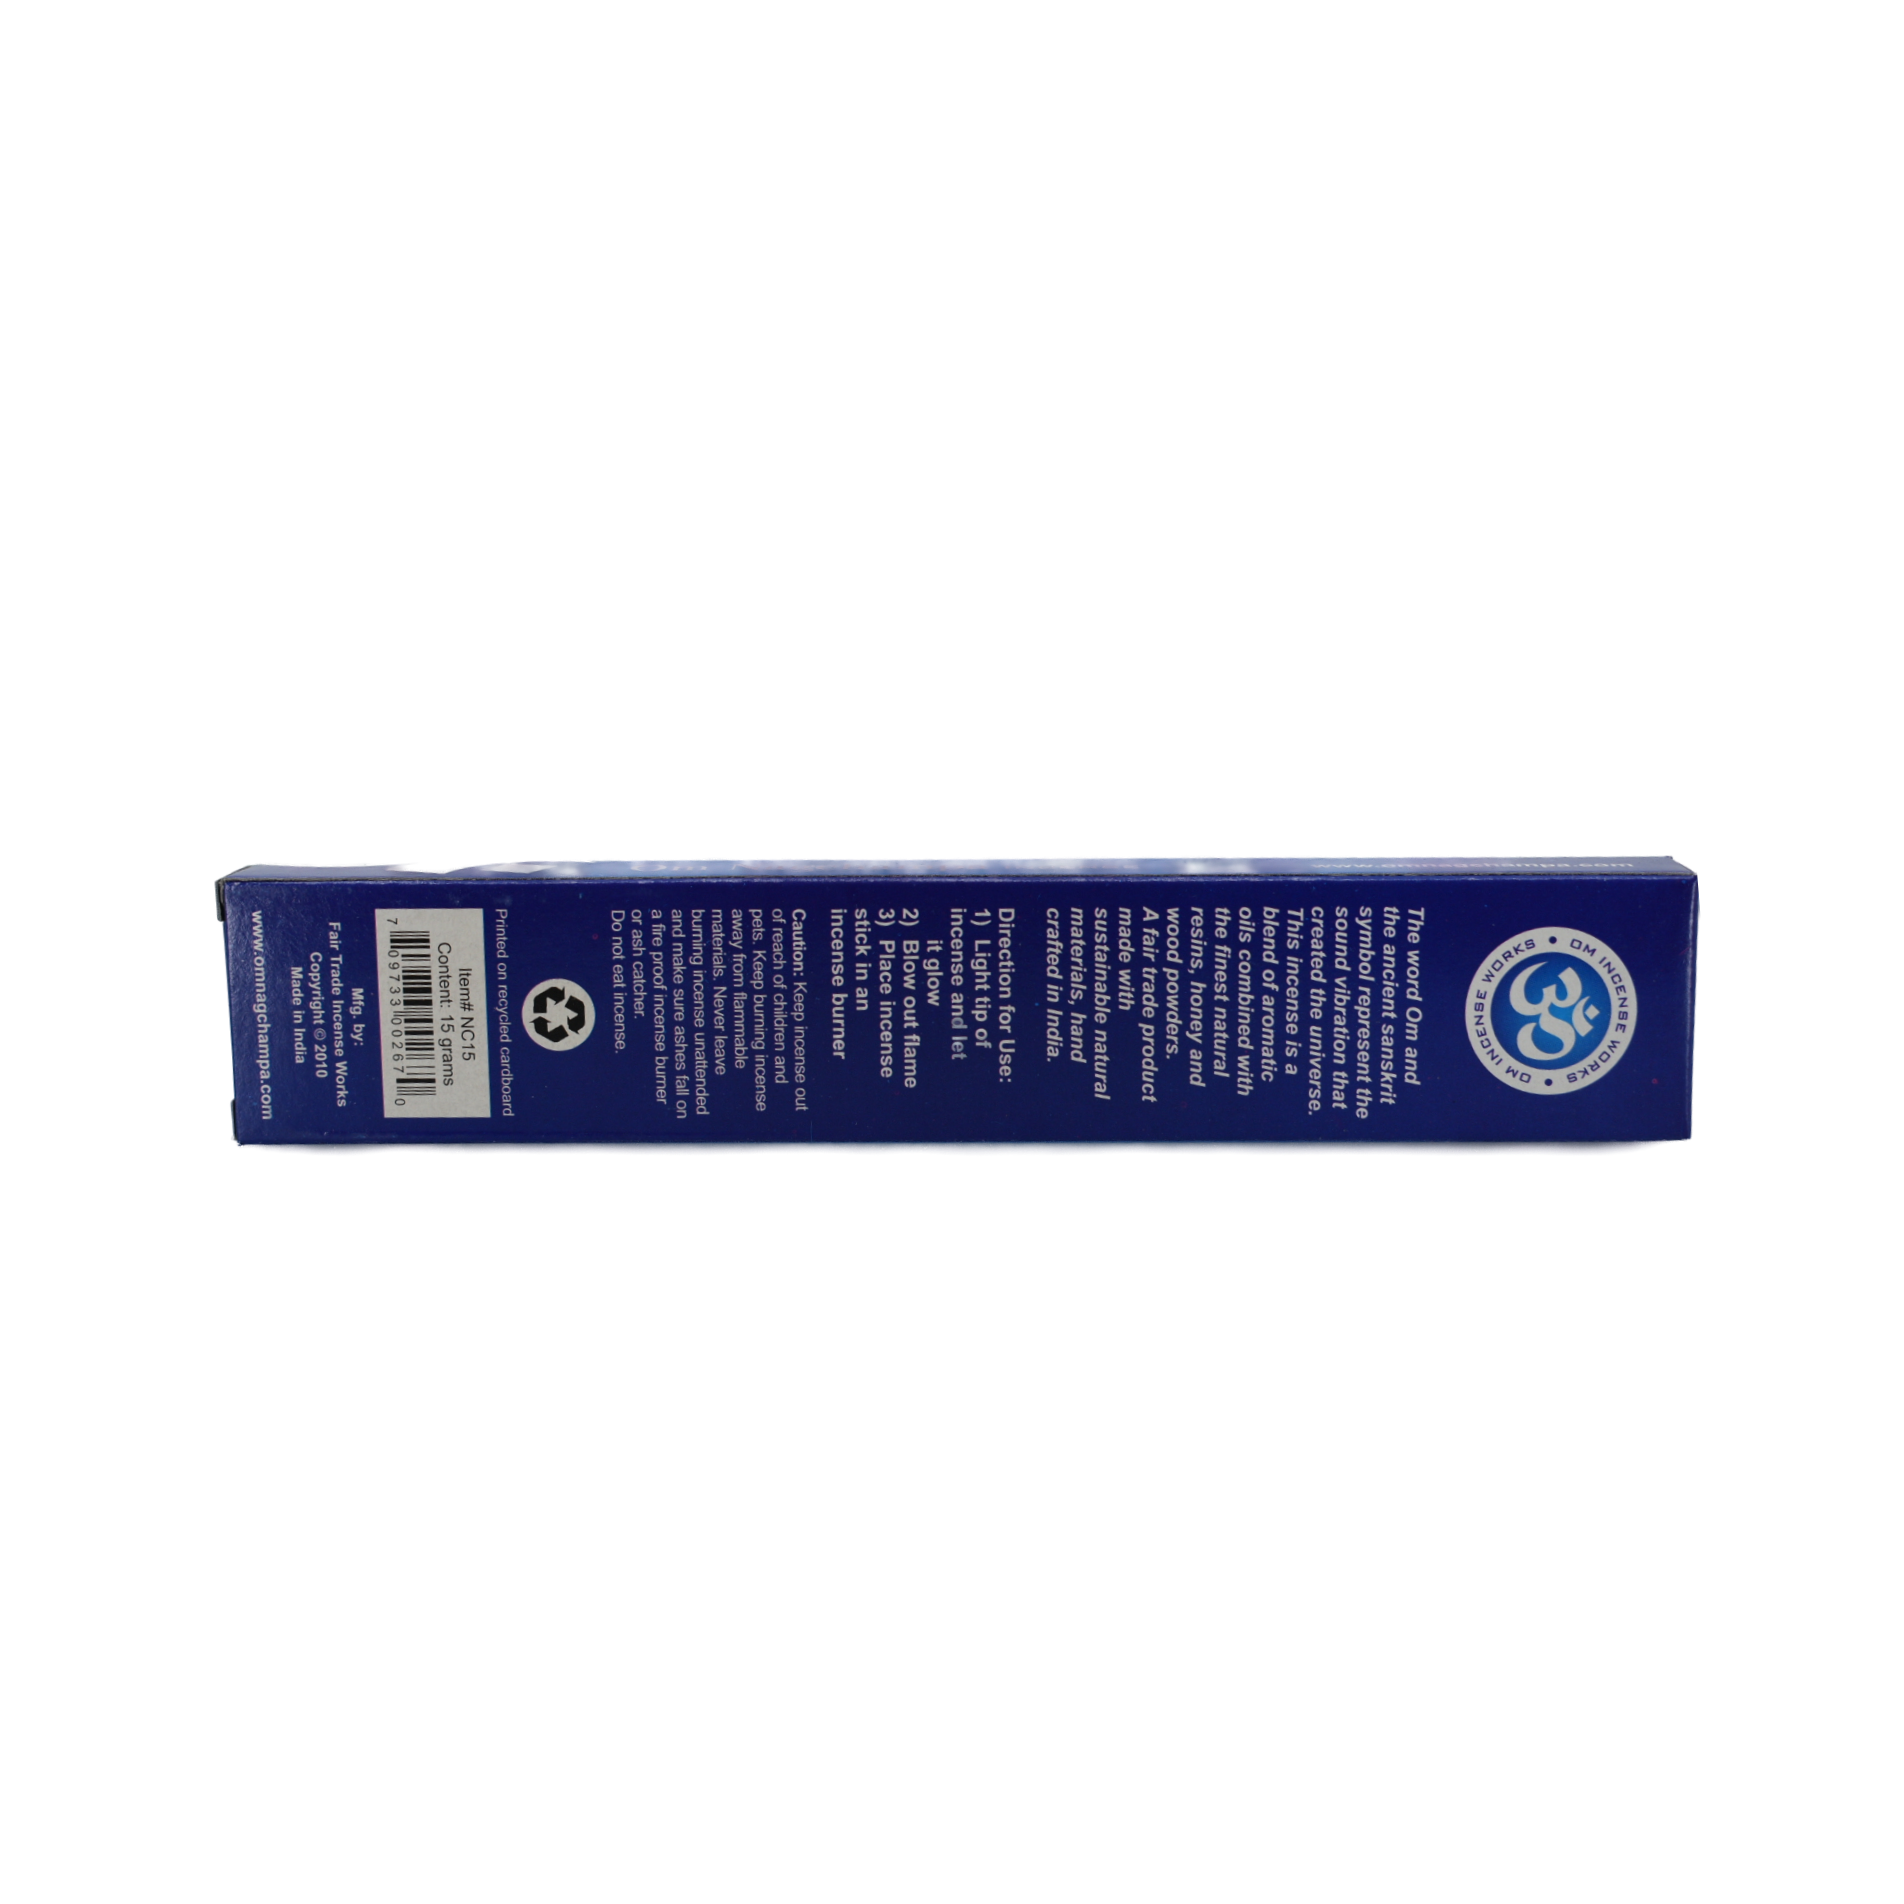 OM Nagchampa Incense Sticks back.  The back cover is dark blue with white lettering.  The top of the box has a circle with the OM symbol in the center with OM Incense Works on the outer circle.  Below the circle are the directions.